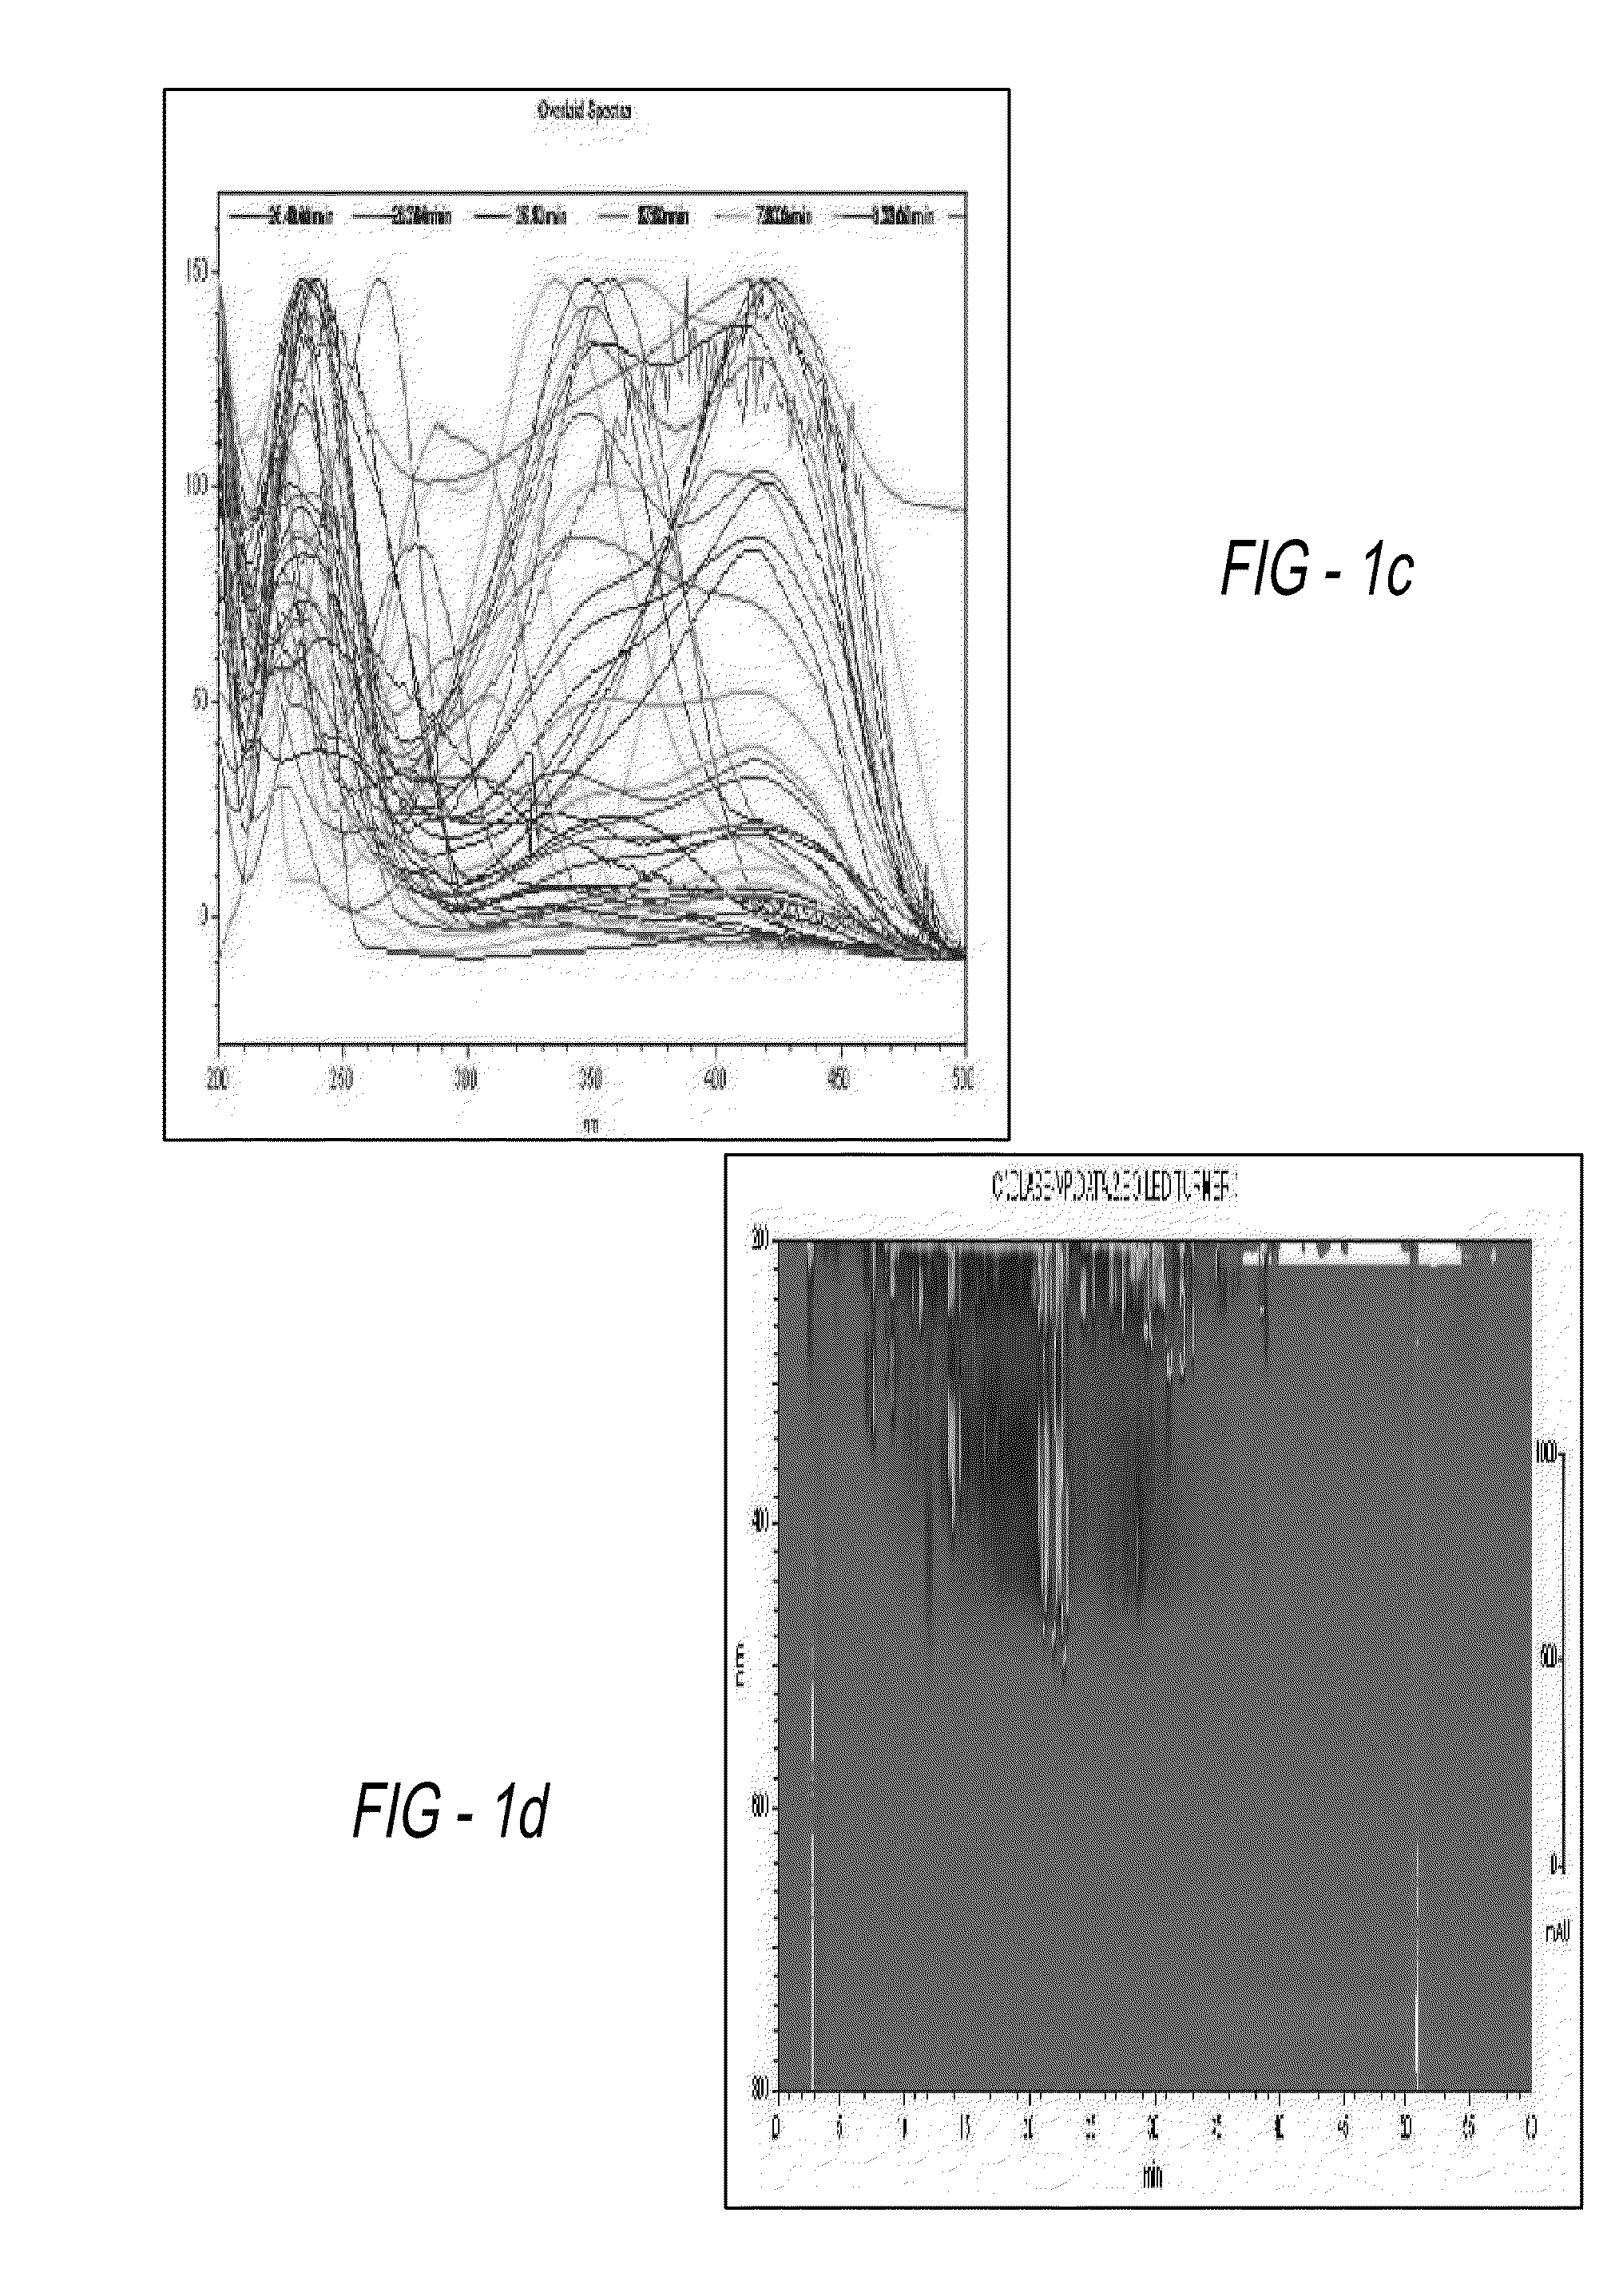 Method for standardization of chemical and therapeutic values of foods and medicines using animated chromatographic fingerprinting